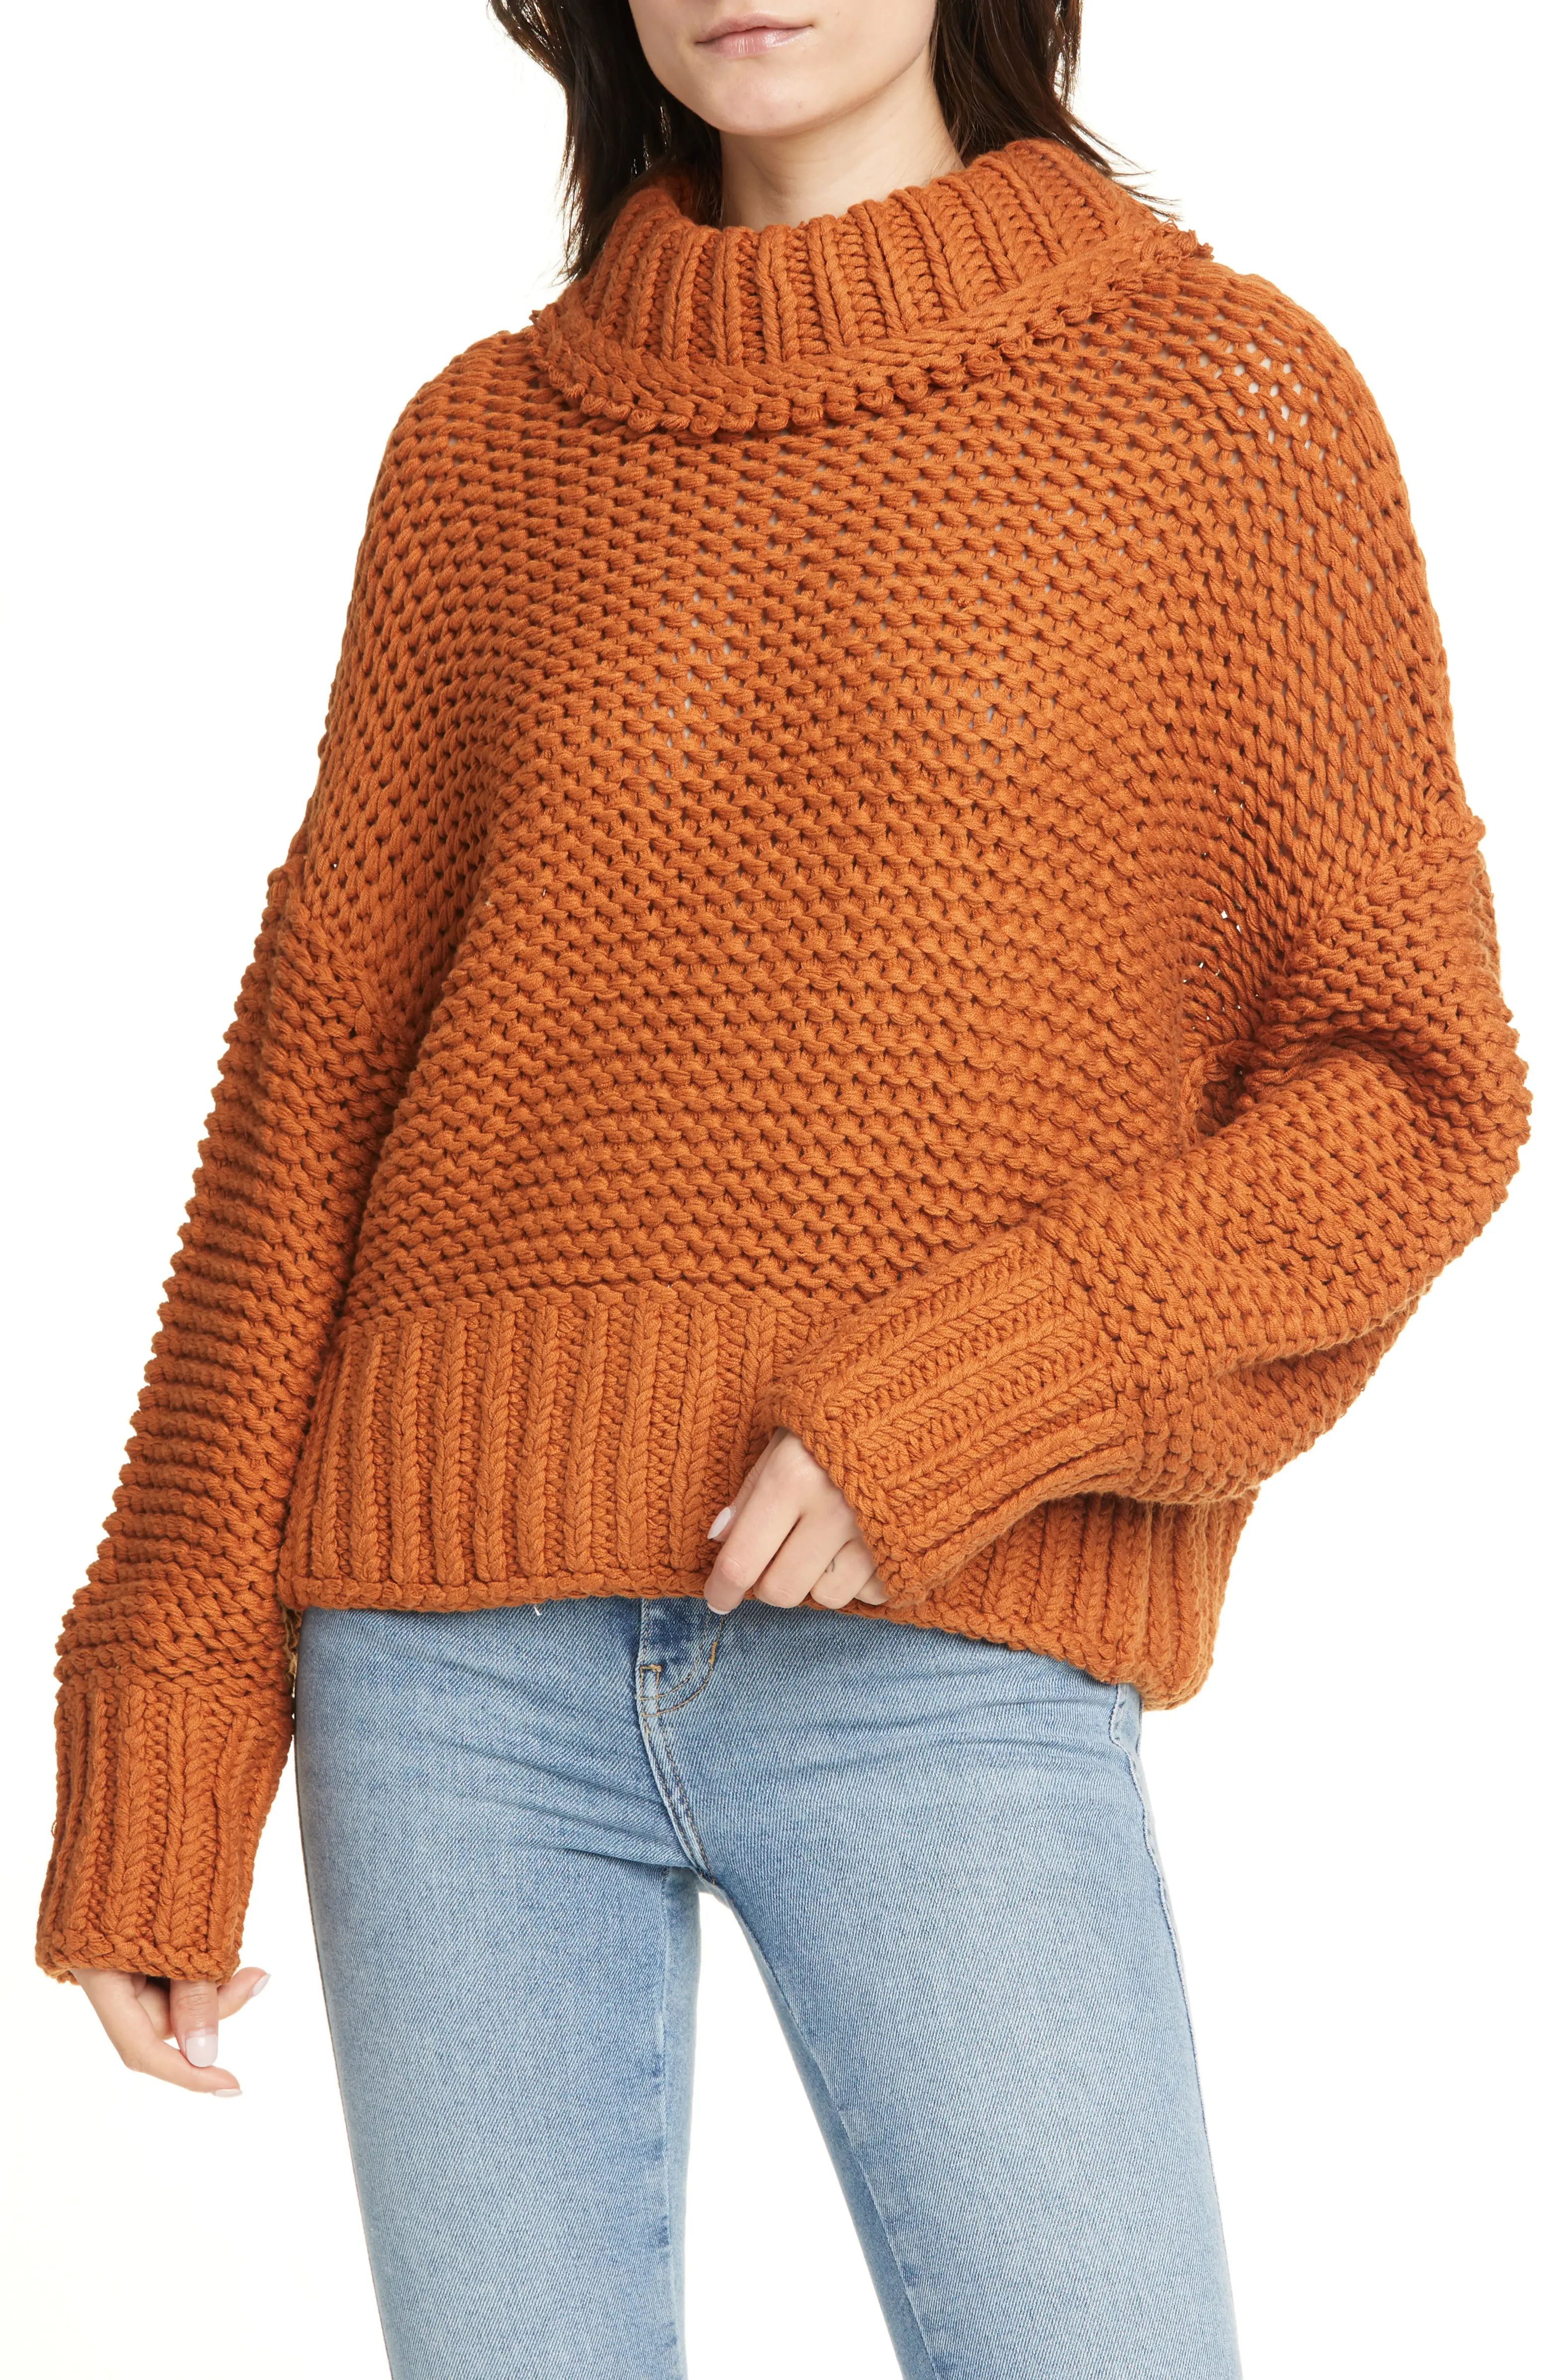 My Only Sunshine Sweater | Nordstrom